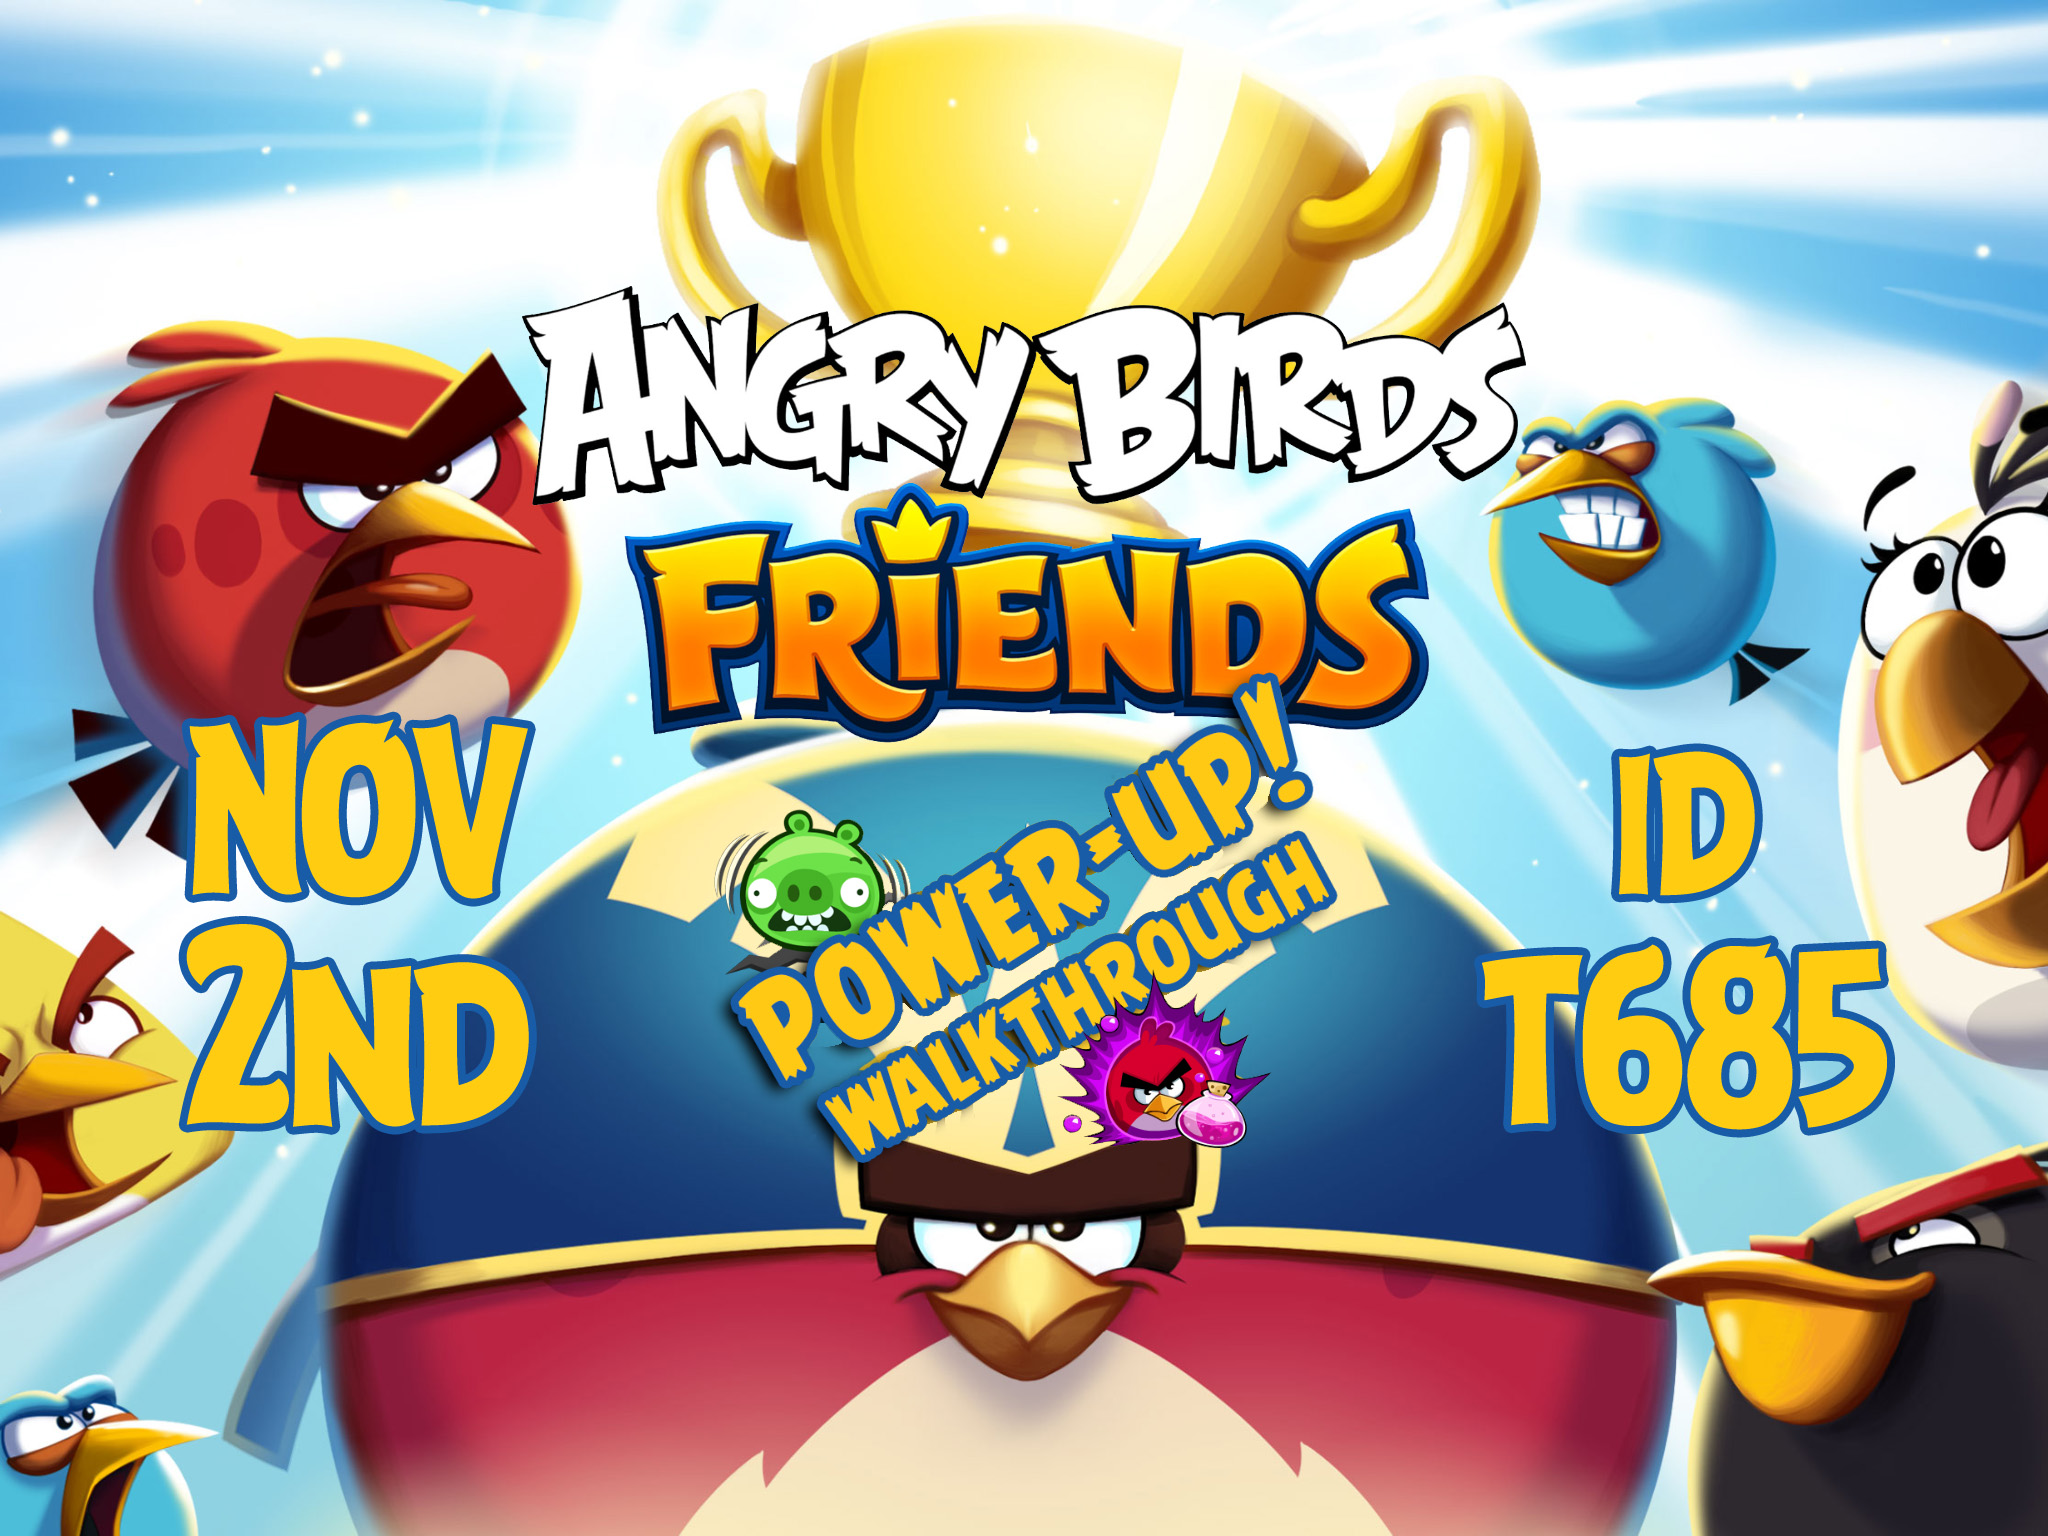 Angry-Birds-Friends-Tournament-T685-Feature-Image-PU